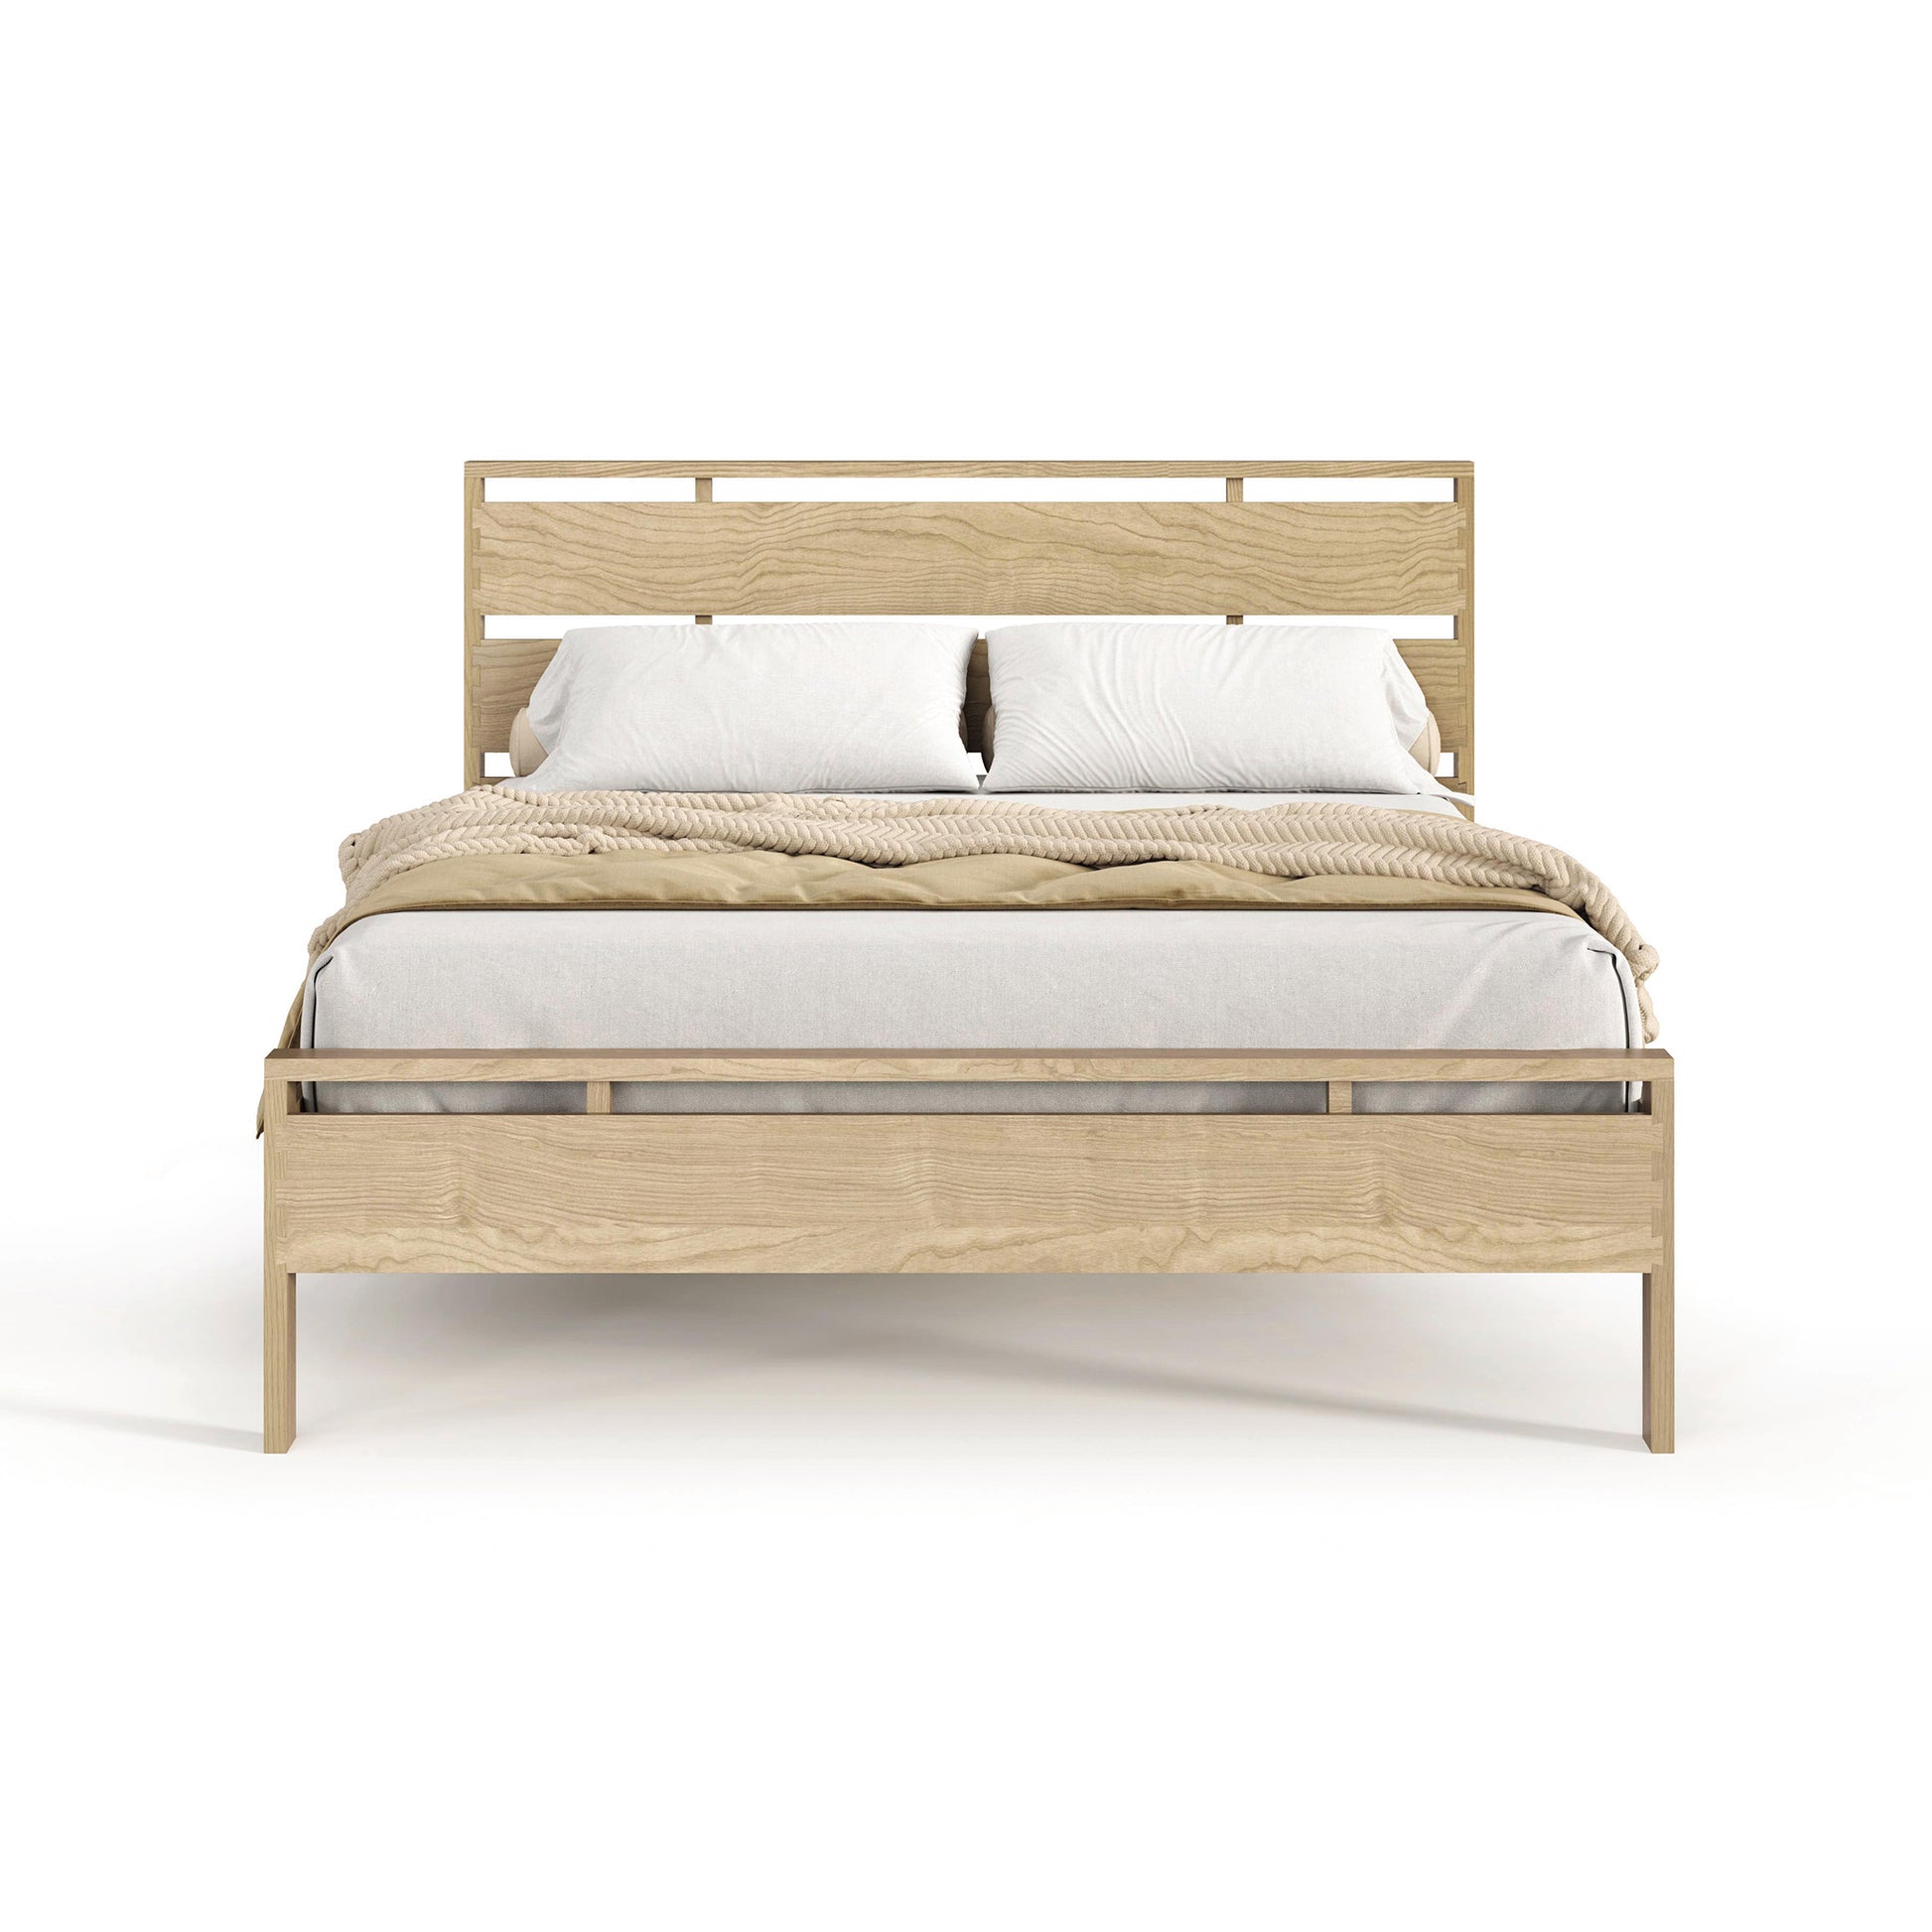 A modern solid oak hardwood bed frame with a headboard, from Copeland Furniture's Oslo Platform Bed collection, dressed with white and beige bedding, positioned against a white background.